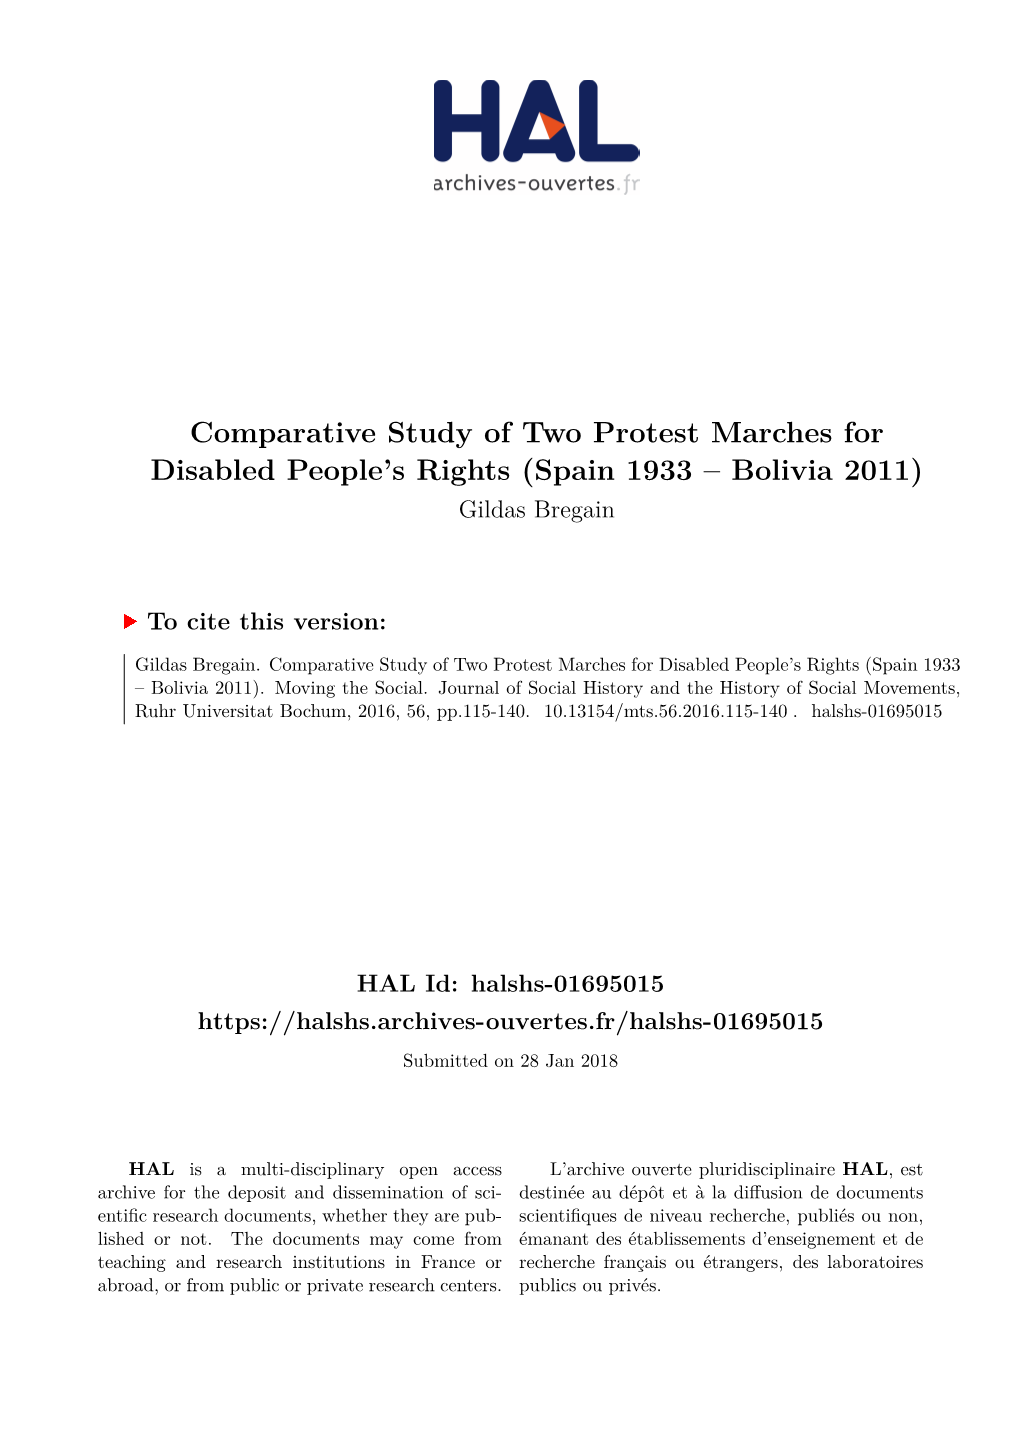 Comparative Study of Two Protest Marches for Disabled People's Rights